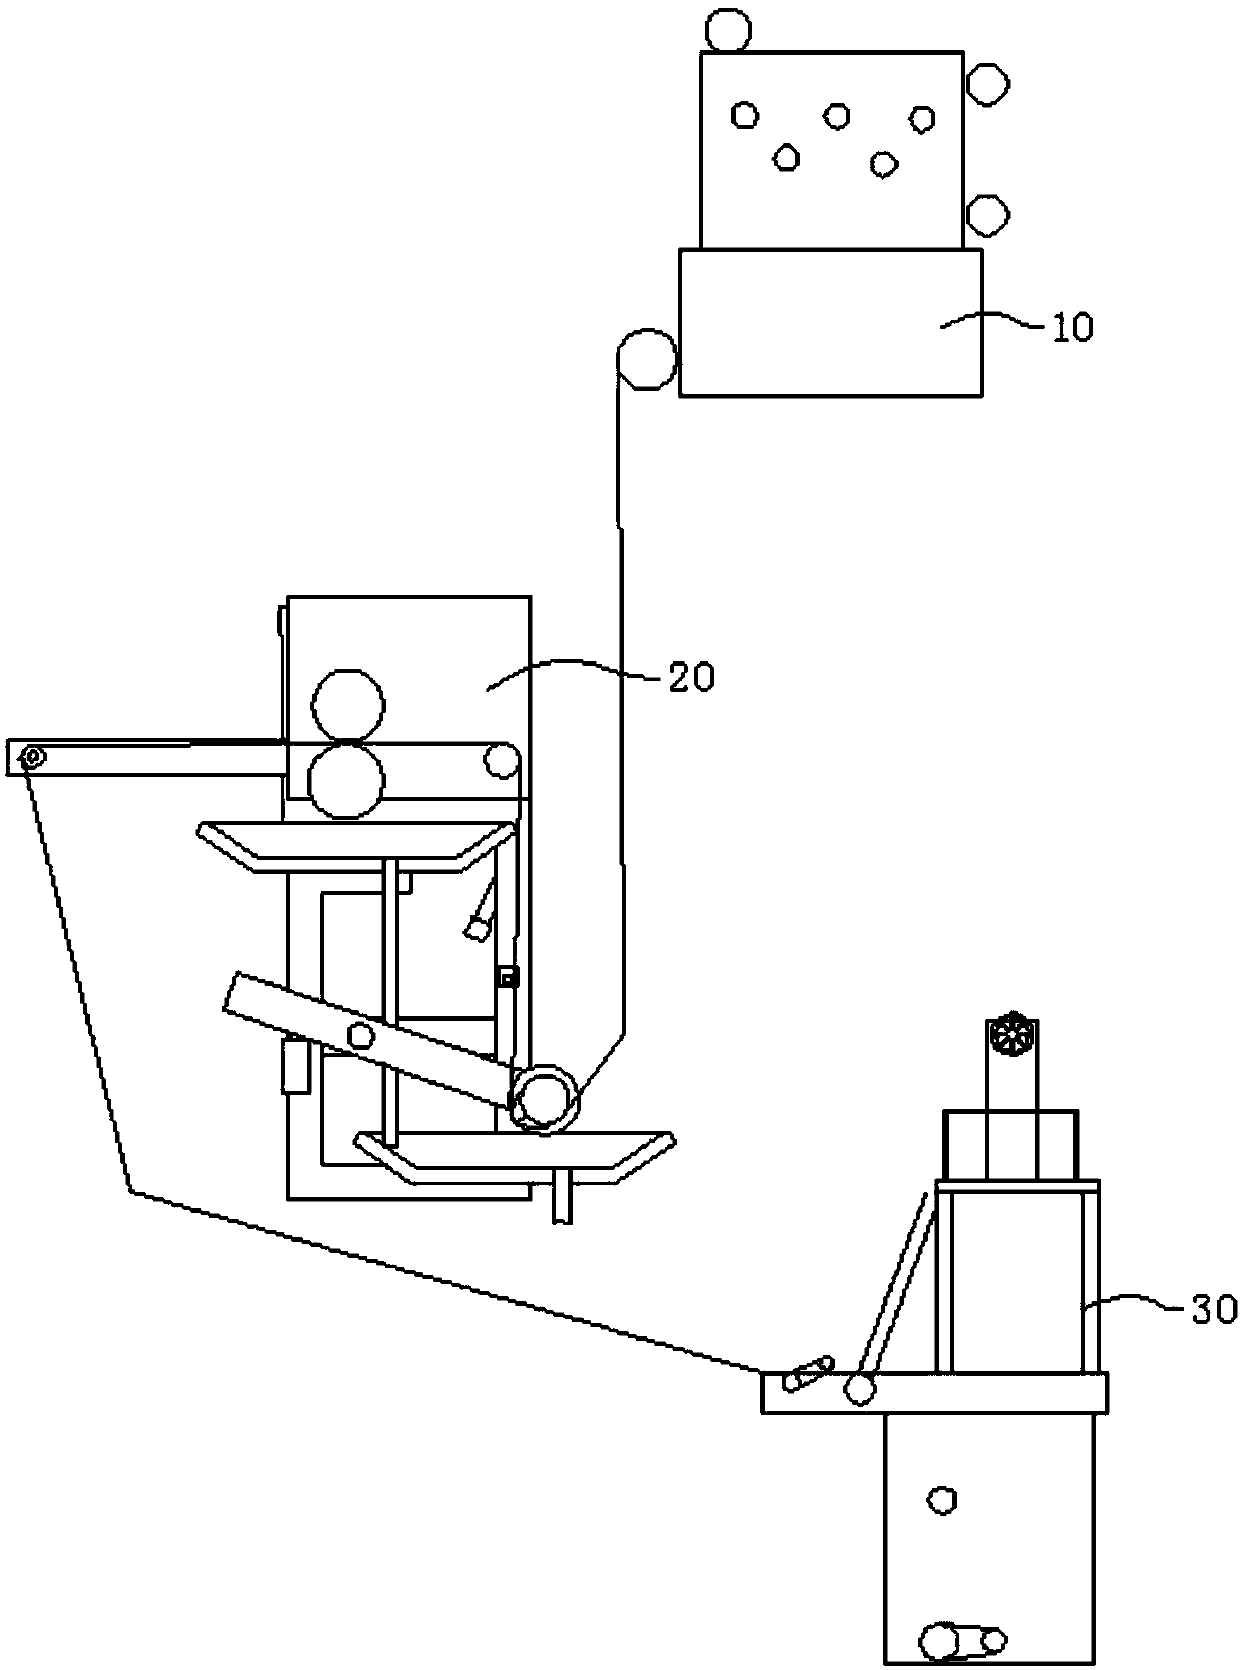 A system for fabric printing and dyeing